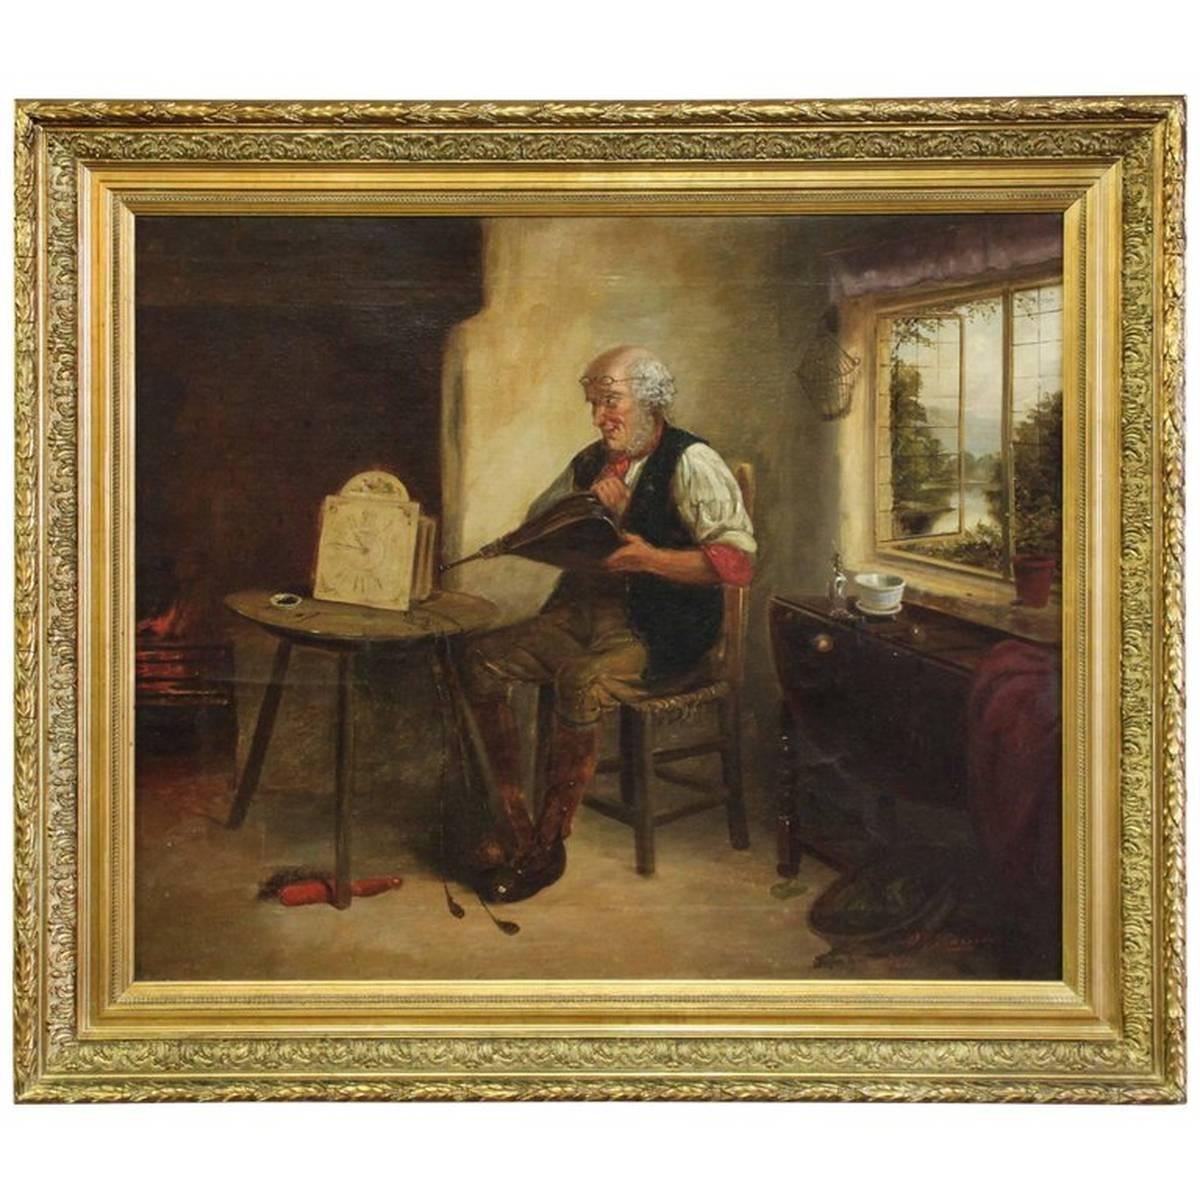 The Old Clockmaker - Painting by G.J. Barnes